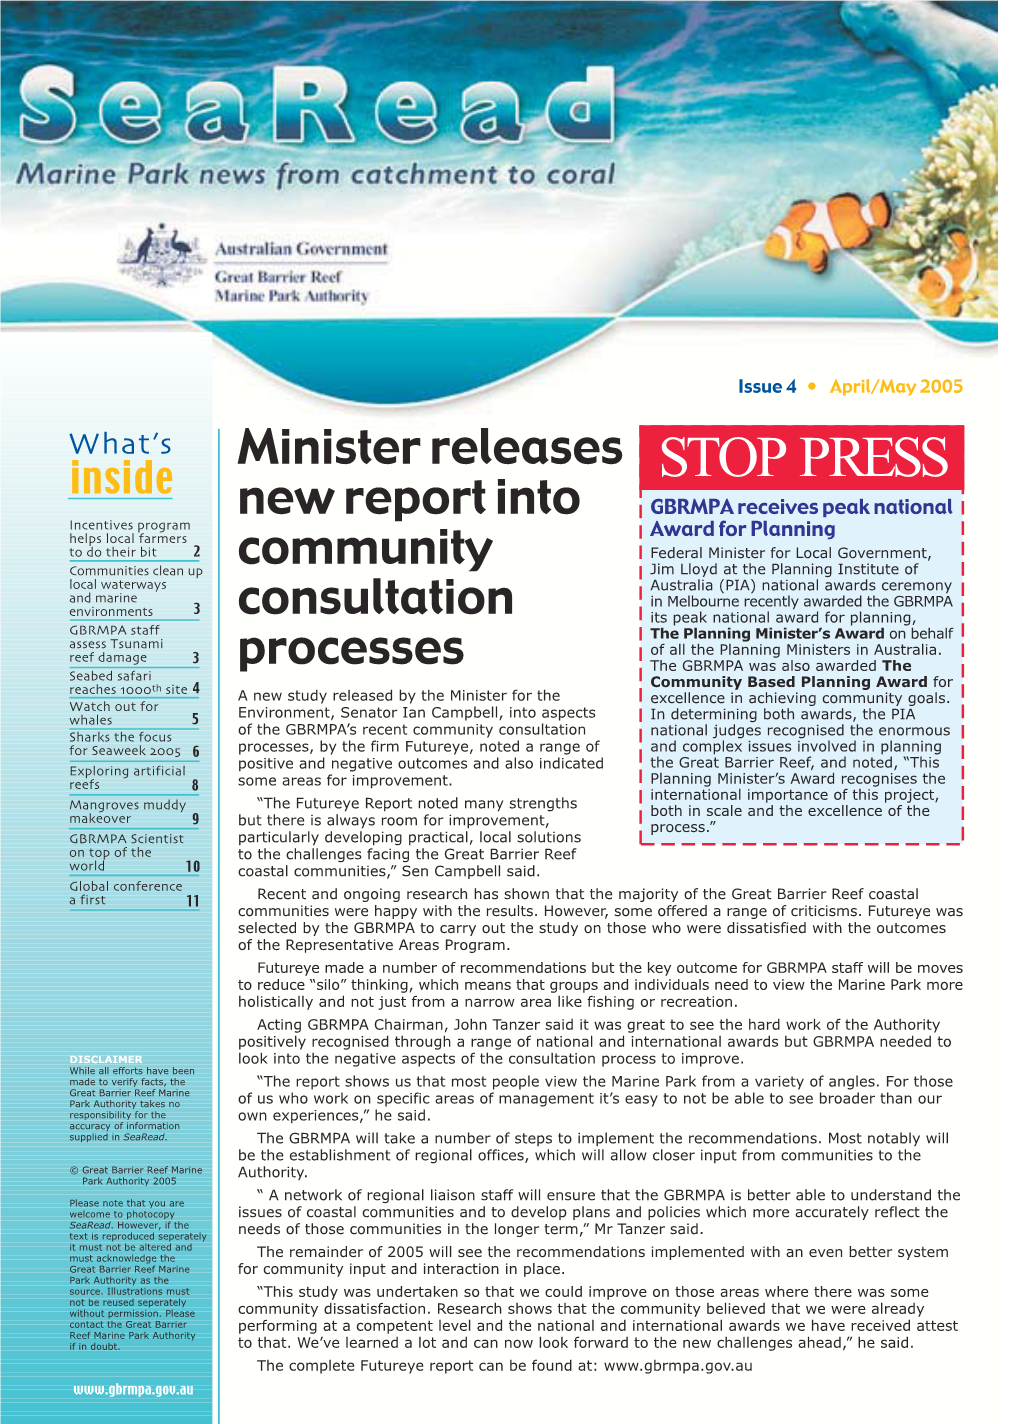 Minister Releases New Report Into Community Consultation Processes